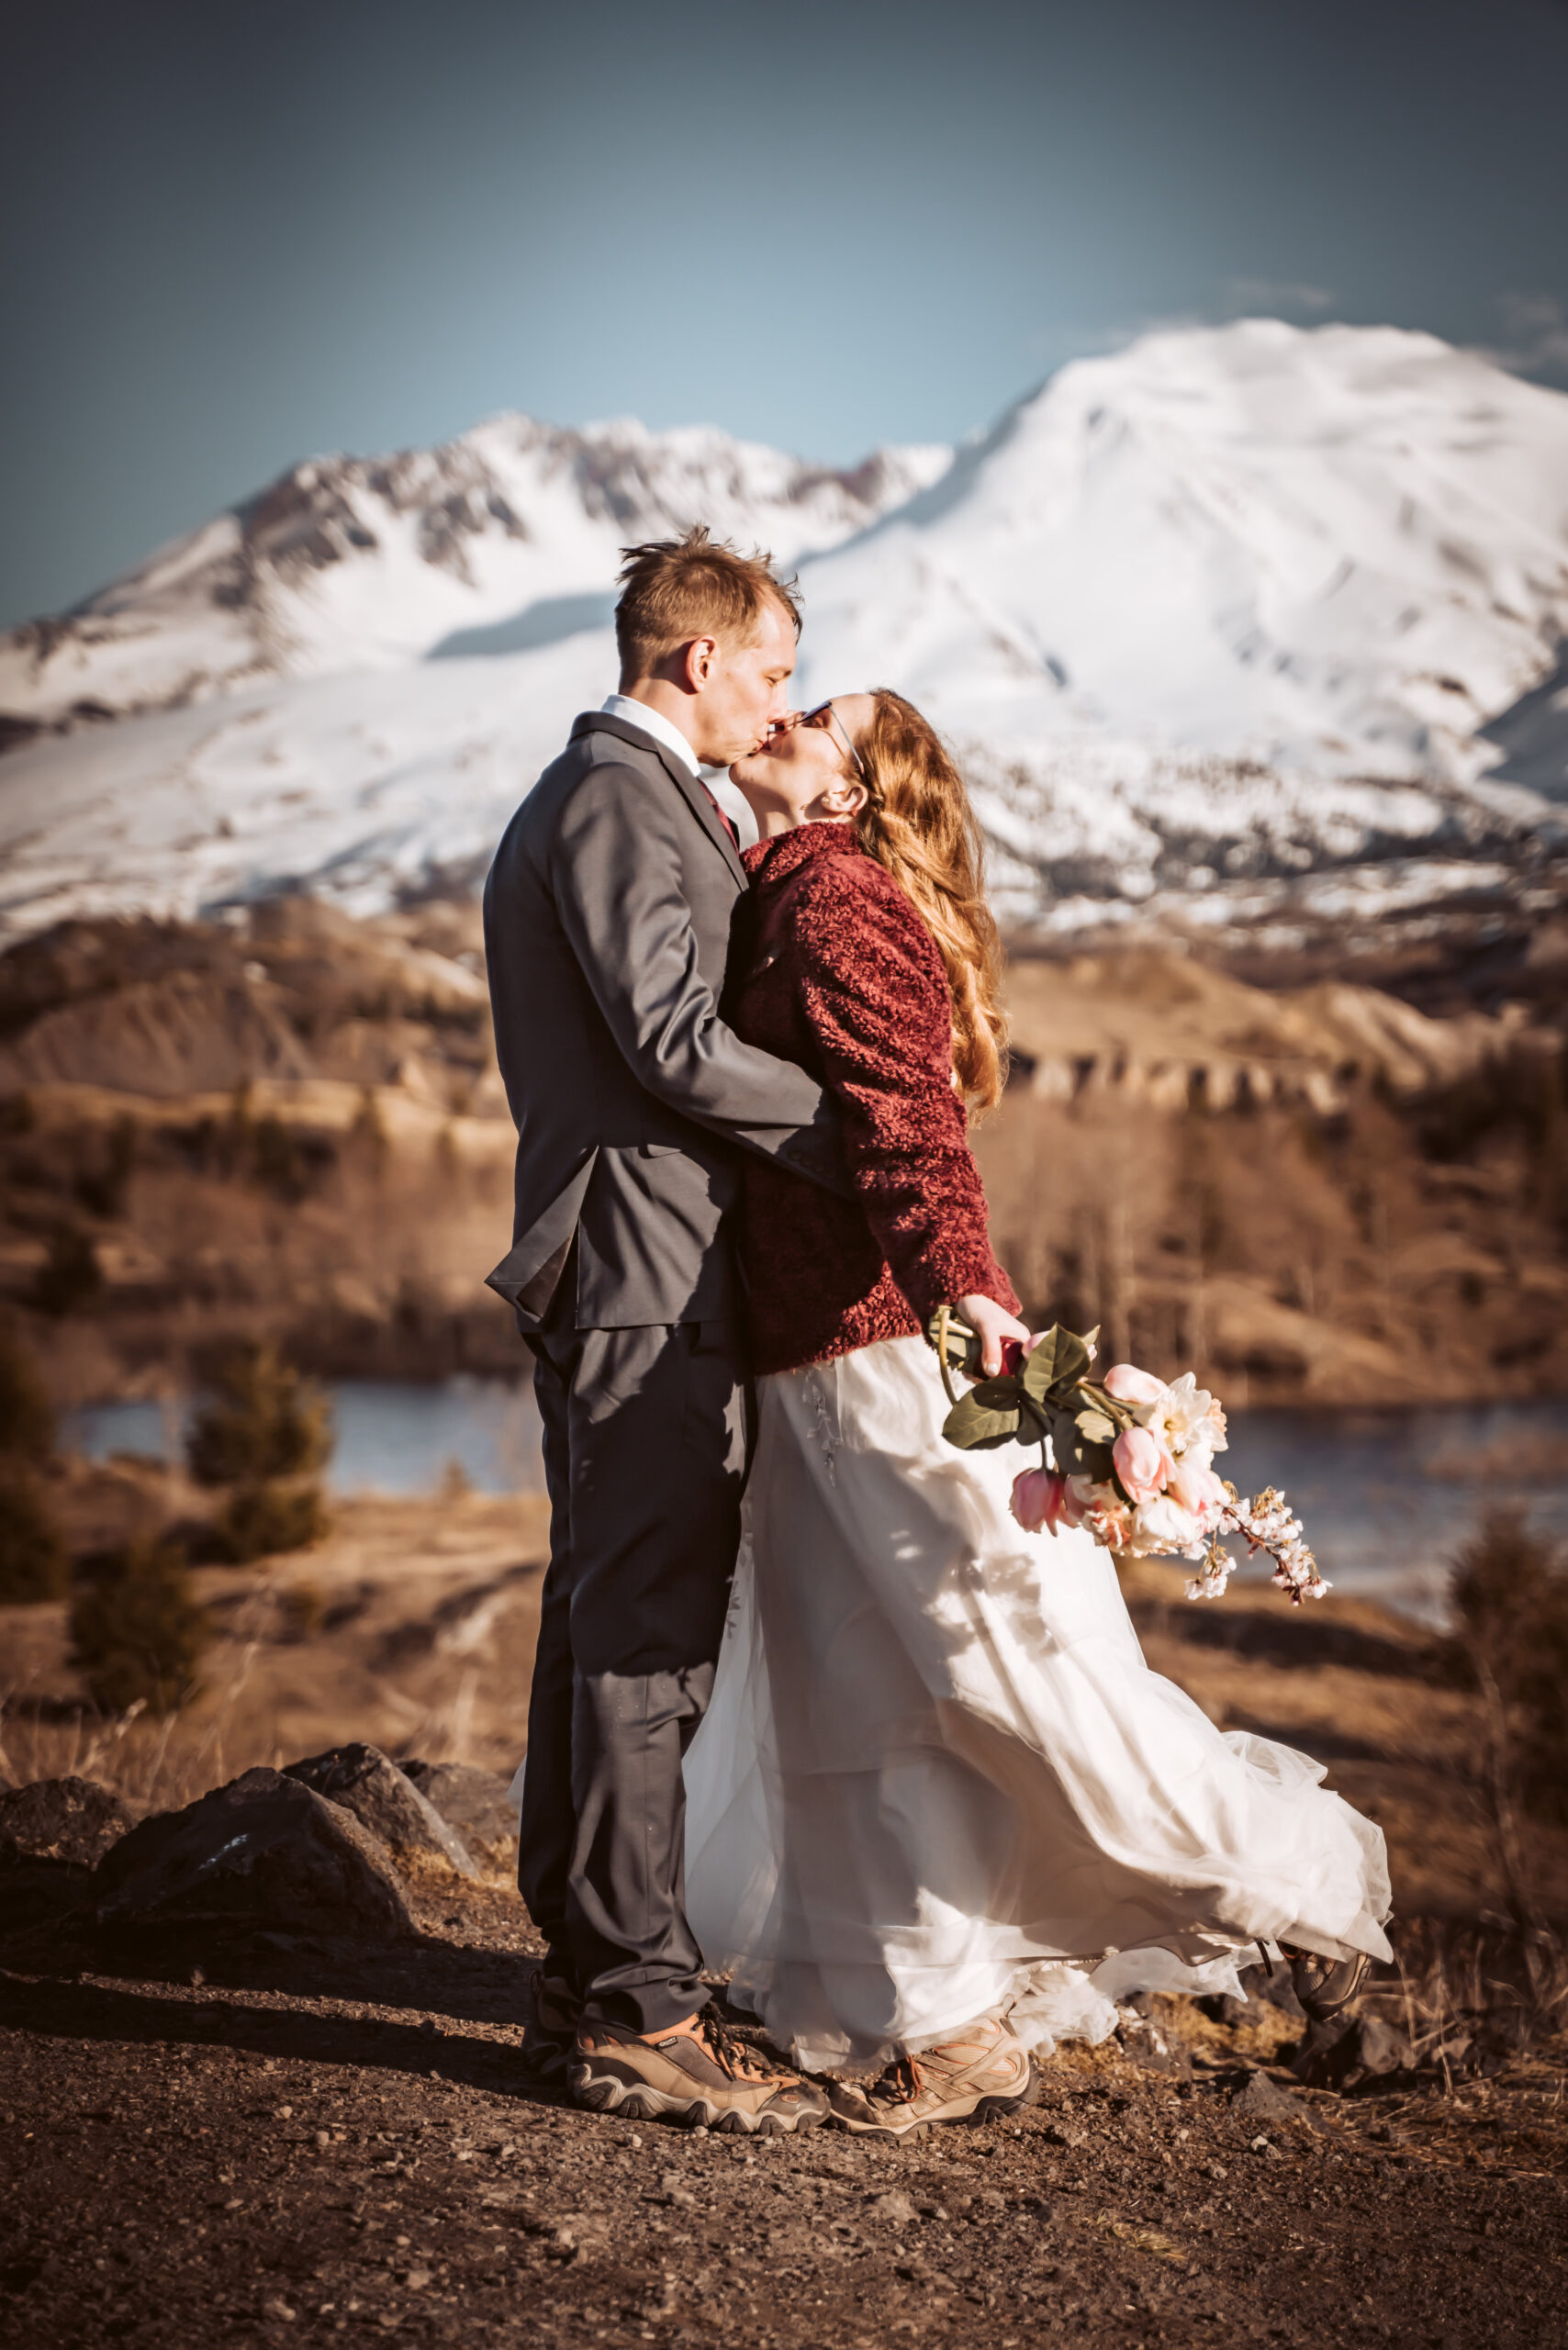  a bride and groom kissing in front of snow capped mount Saint Helens for their elopement day